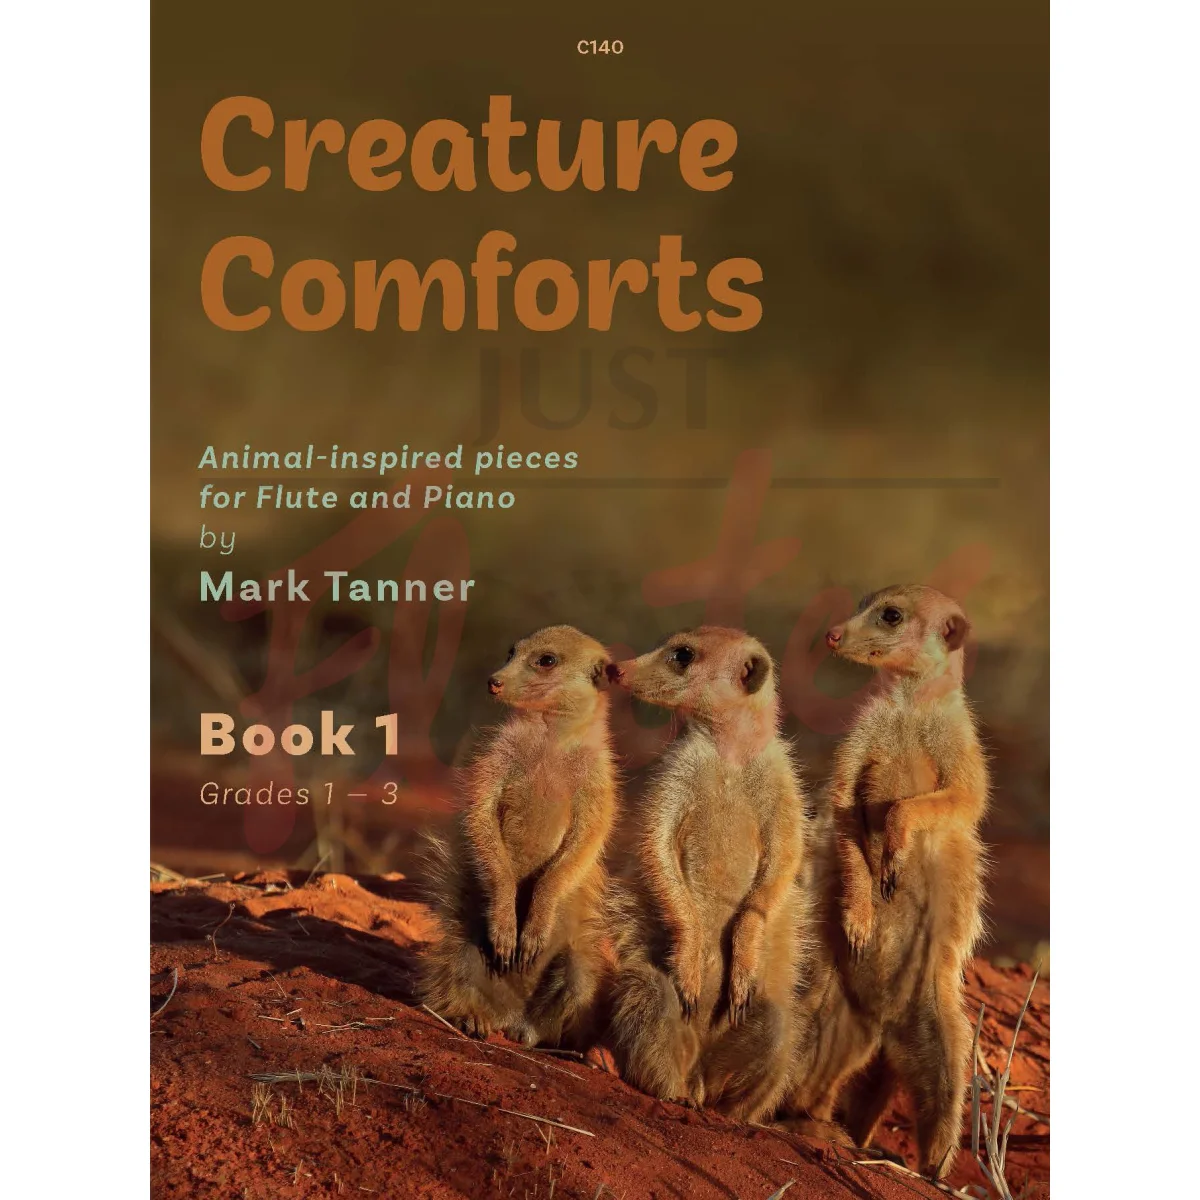 Creature Comforts for Flute and Piano, Book 1